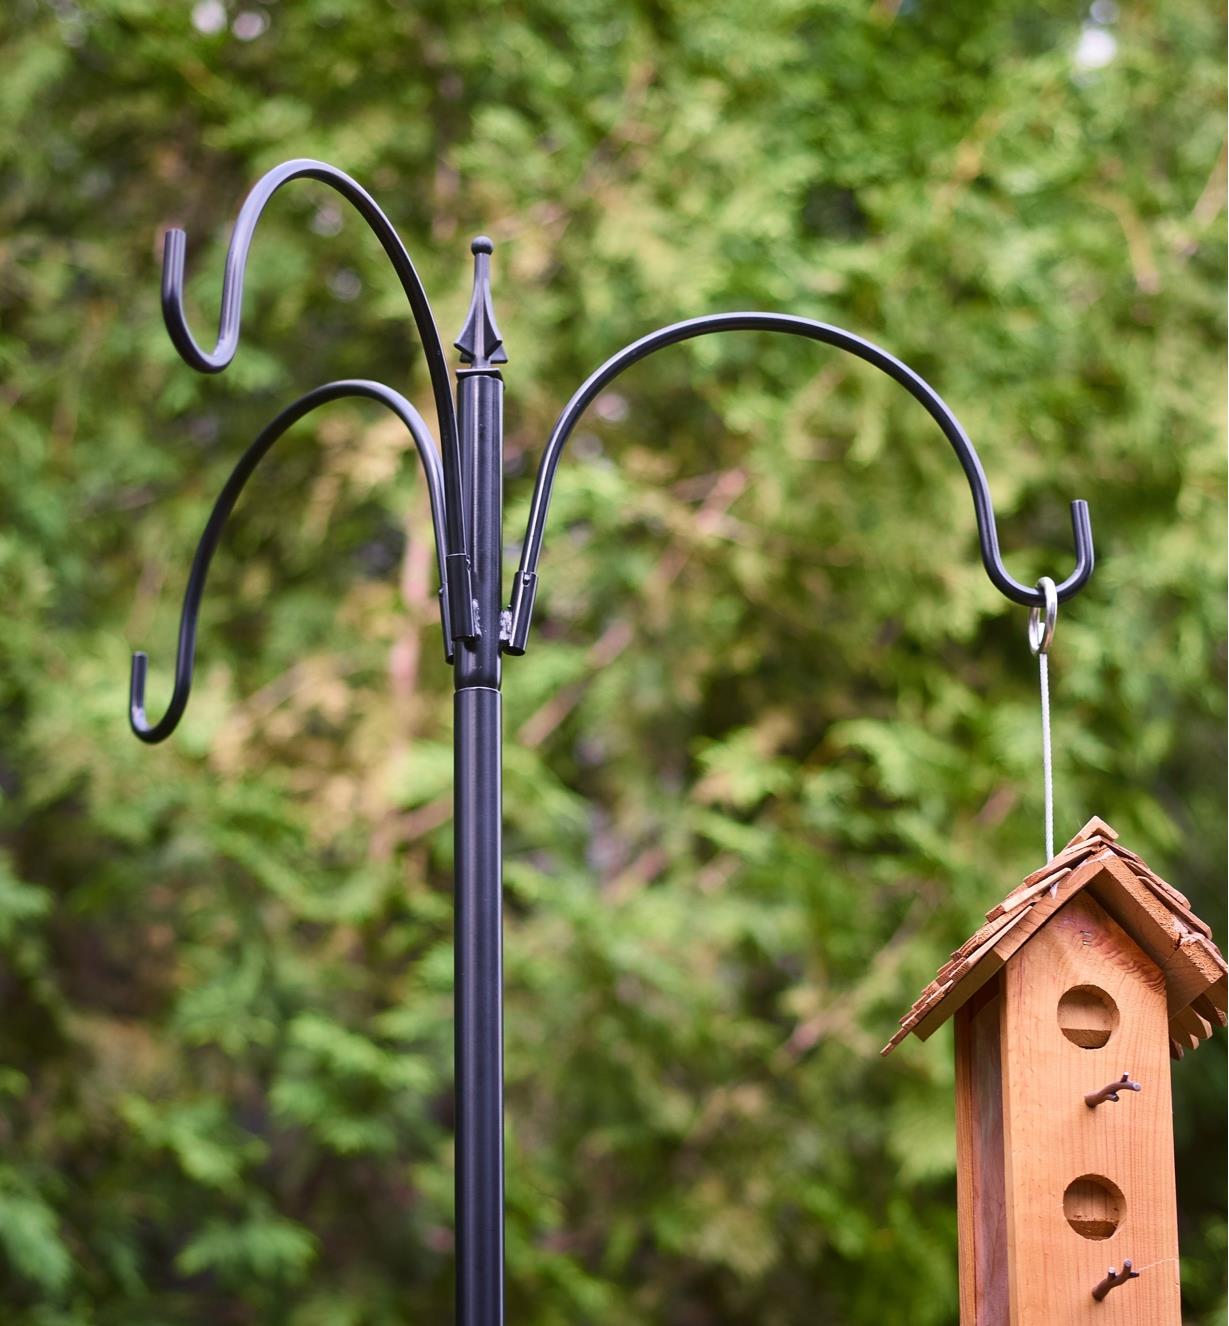 A birdhouse hanging from a three-arm garden pole